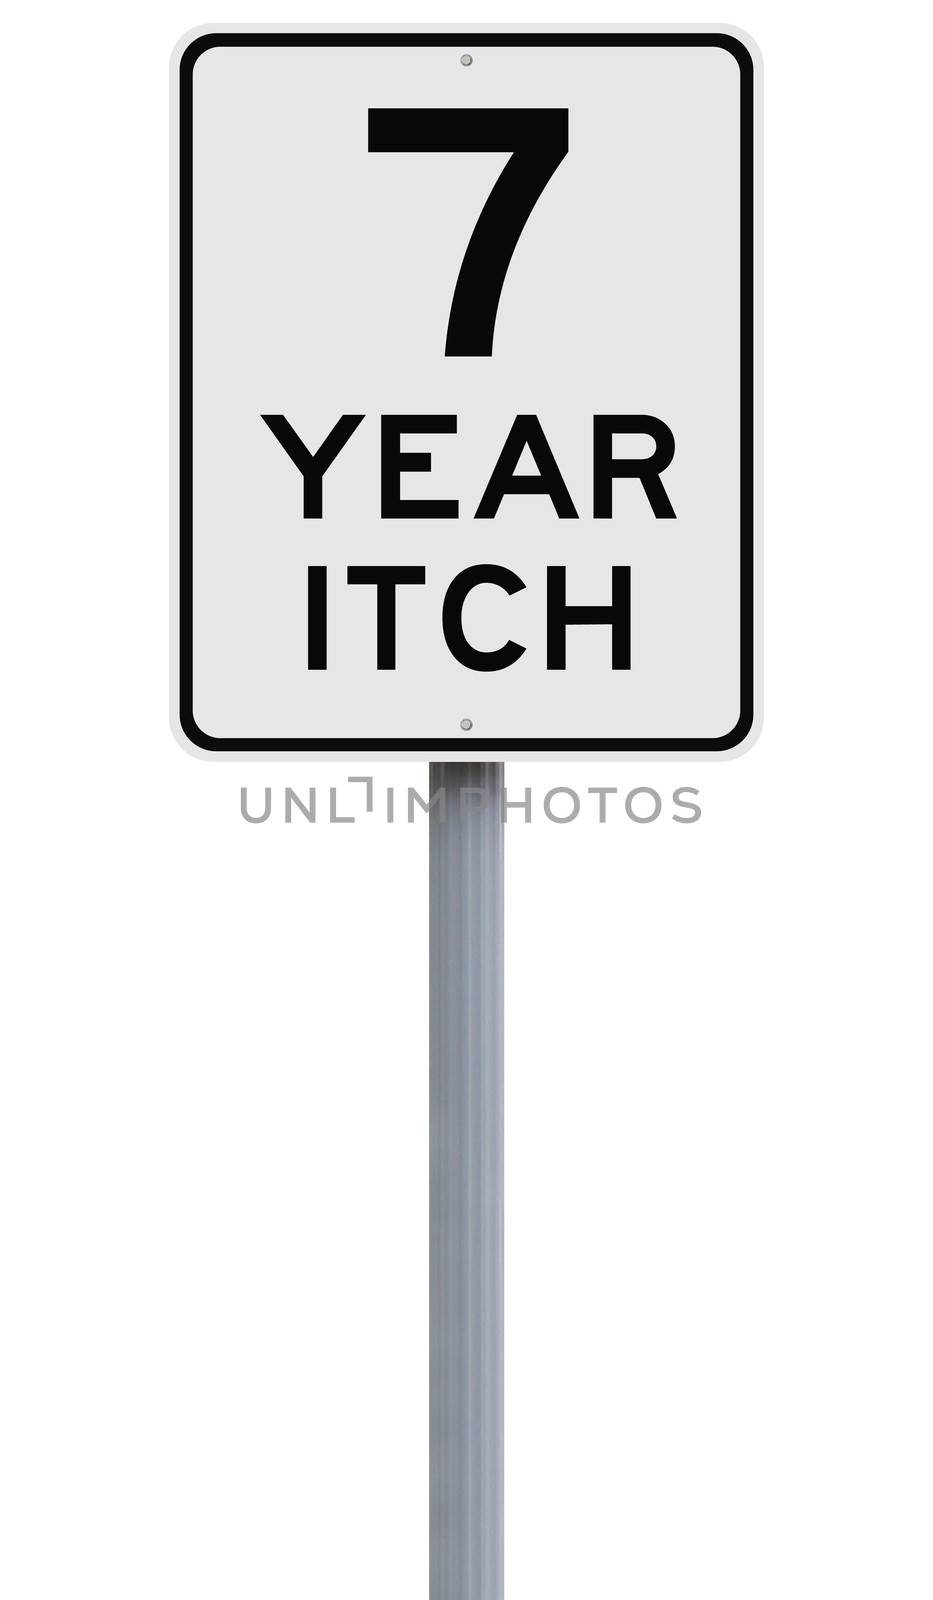 A modified speed limit sign indicating Seven Year Itch